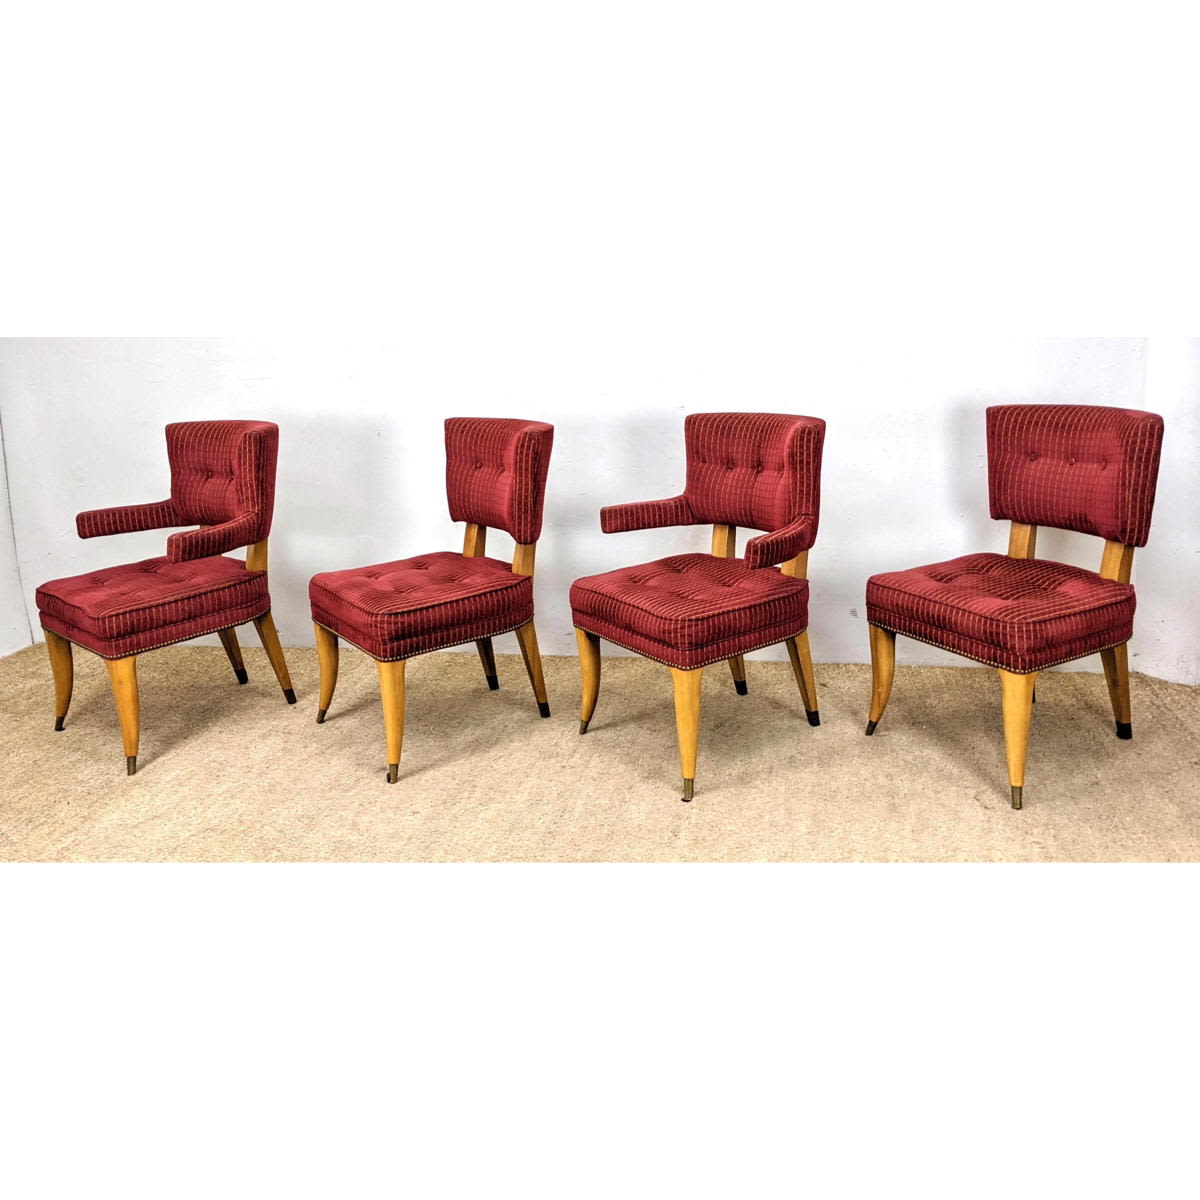 Set 4 Blond Wood Frame Dining Chairs  2bb019